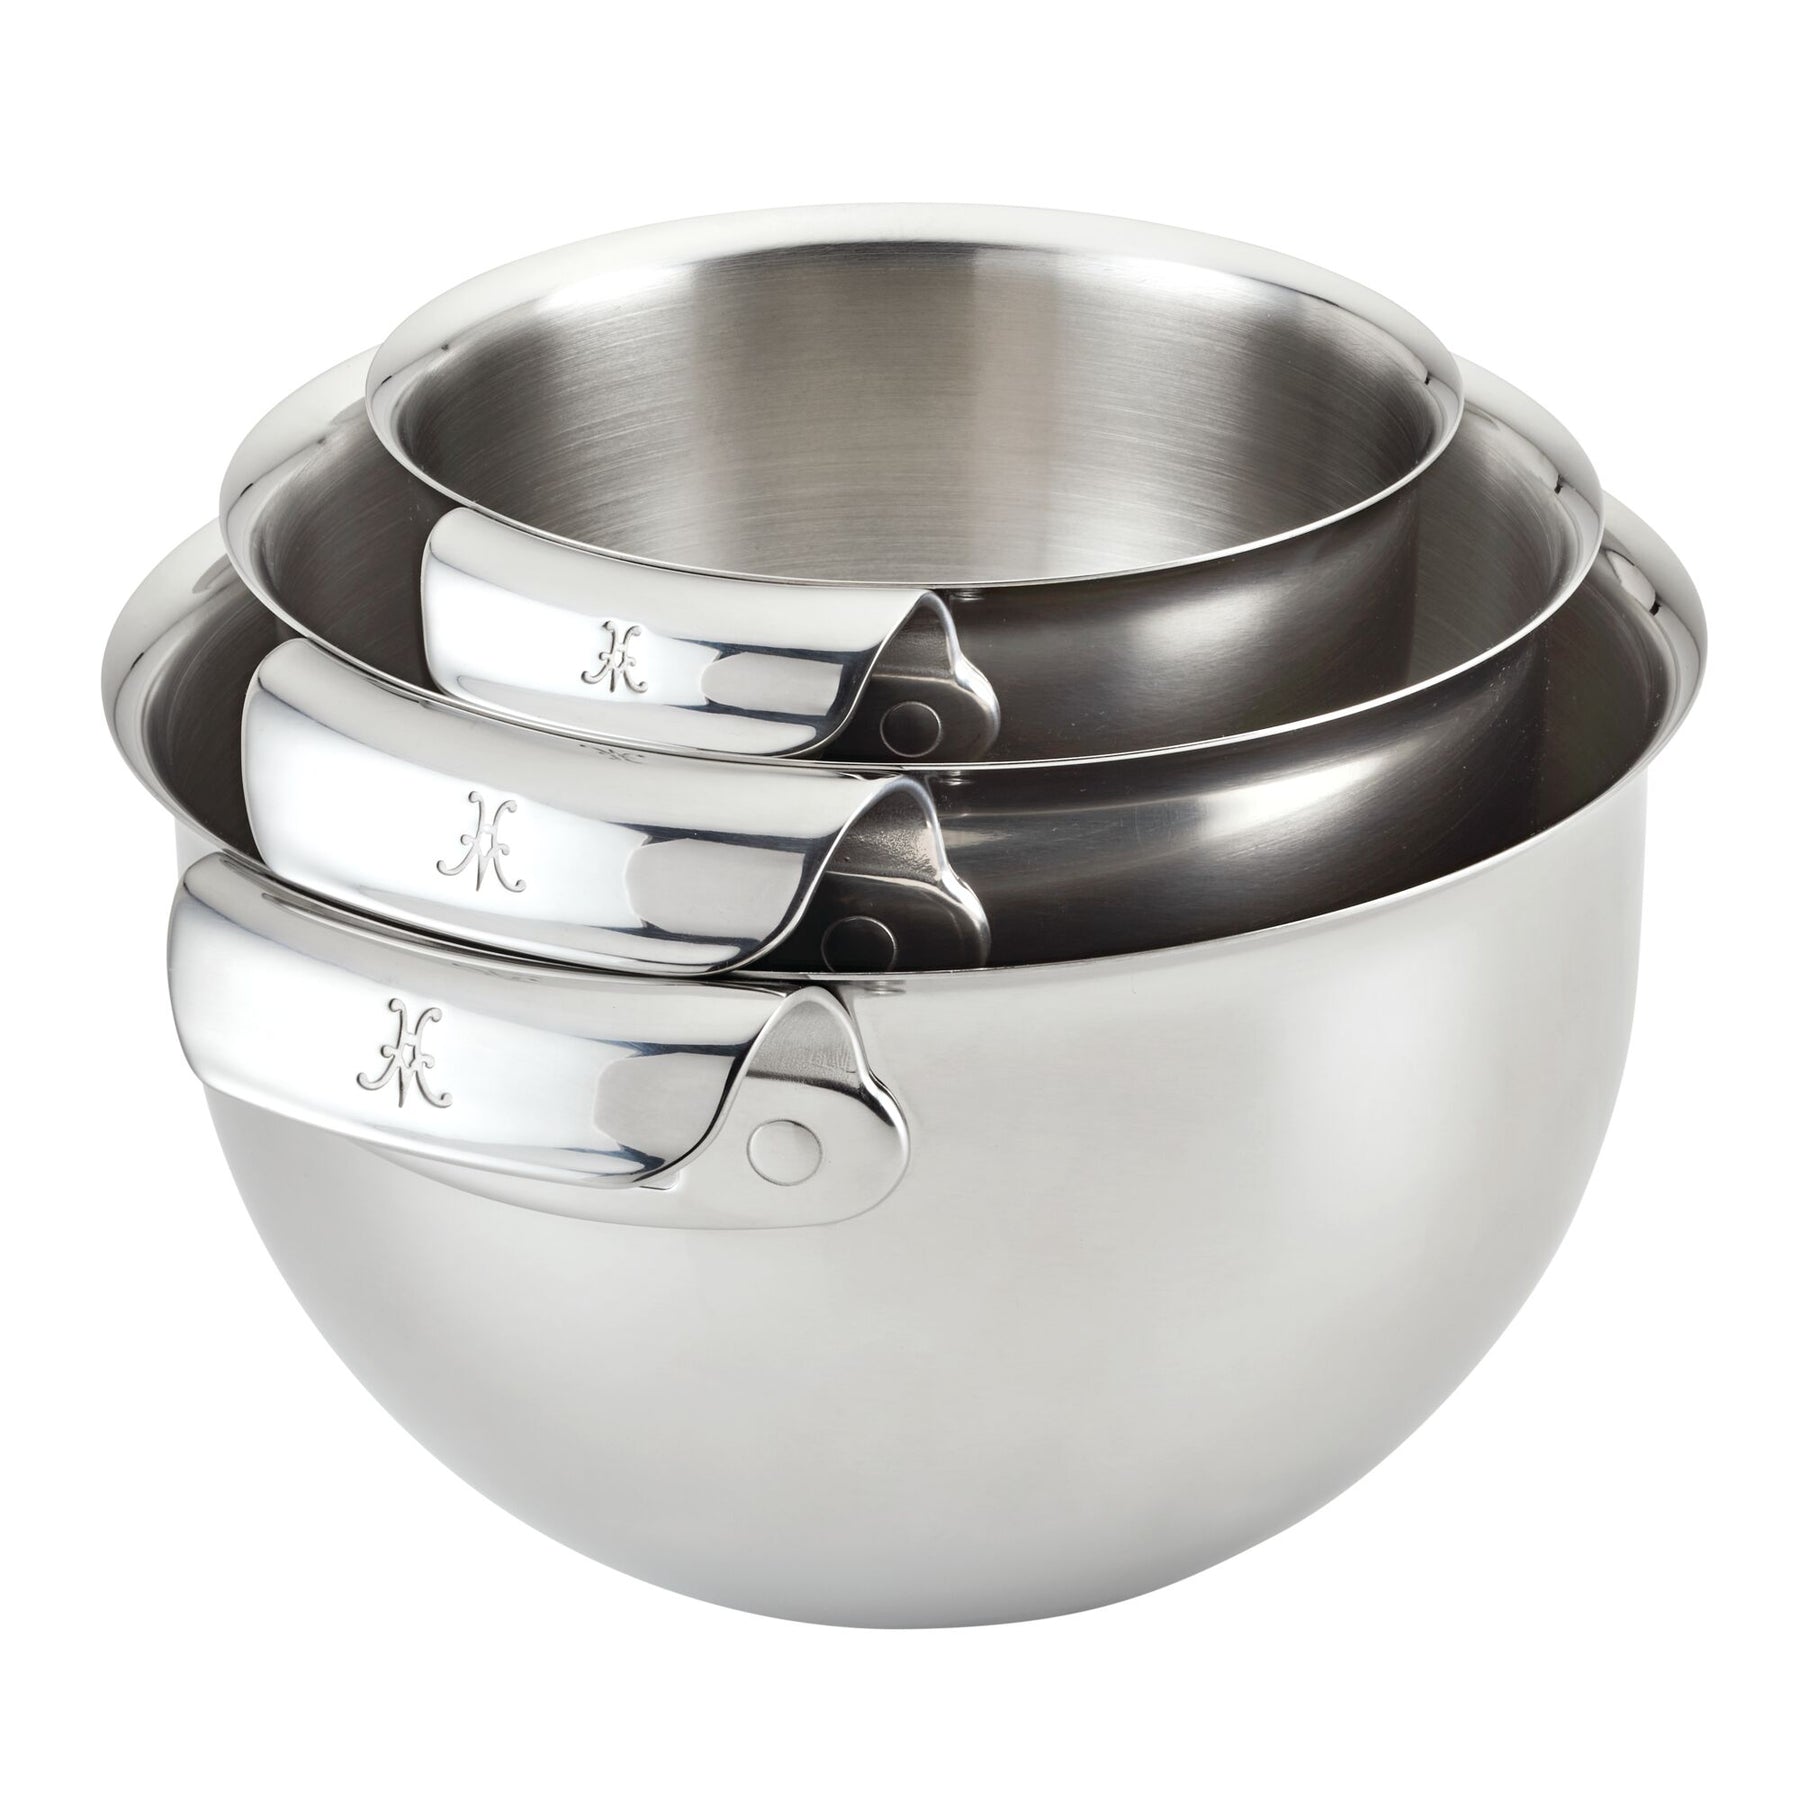 HexClad Set of Three Stainless Steel Mixing and Storage Bowls